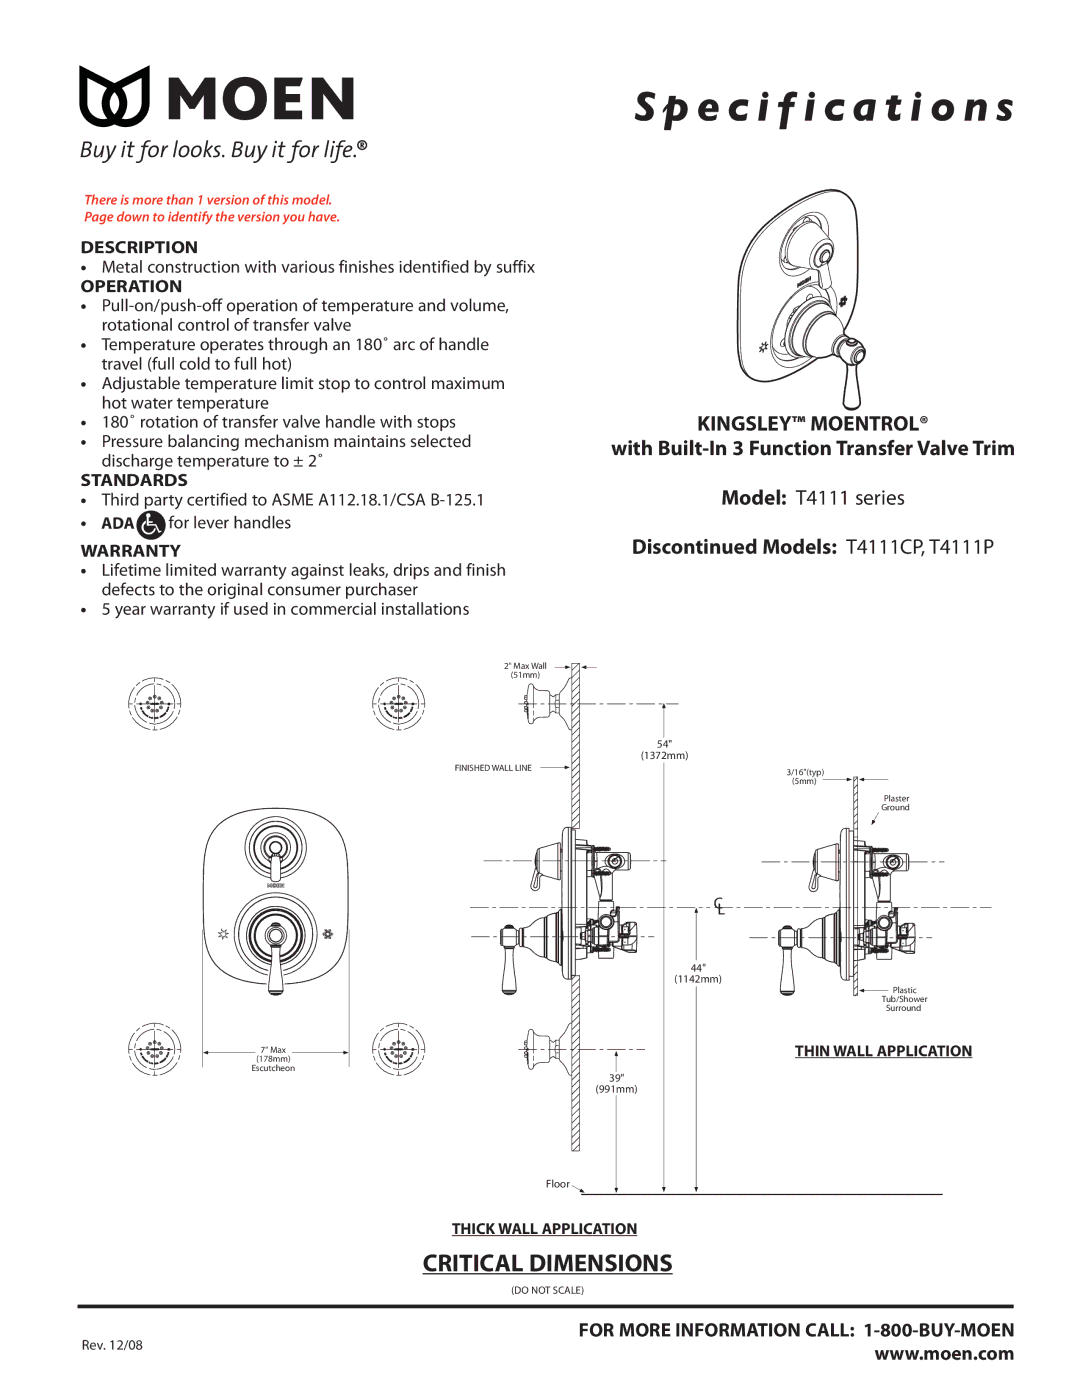 Moen T4111 SERIES dimensions Specification s 